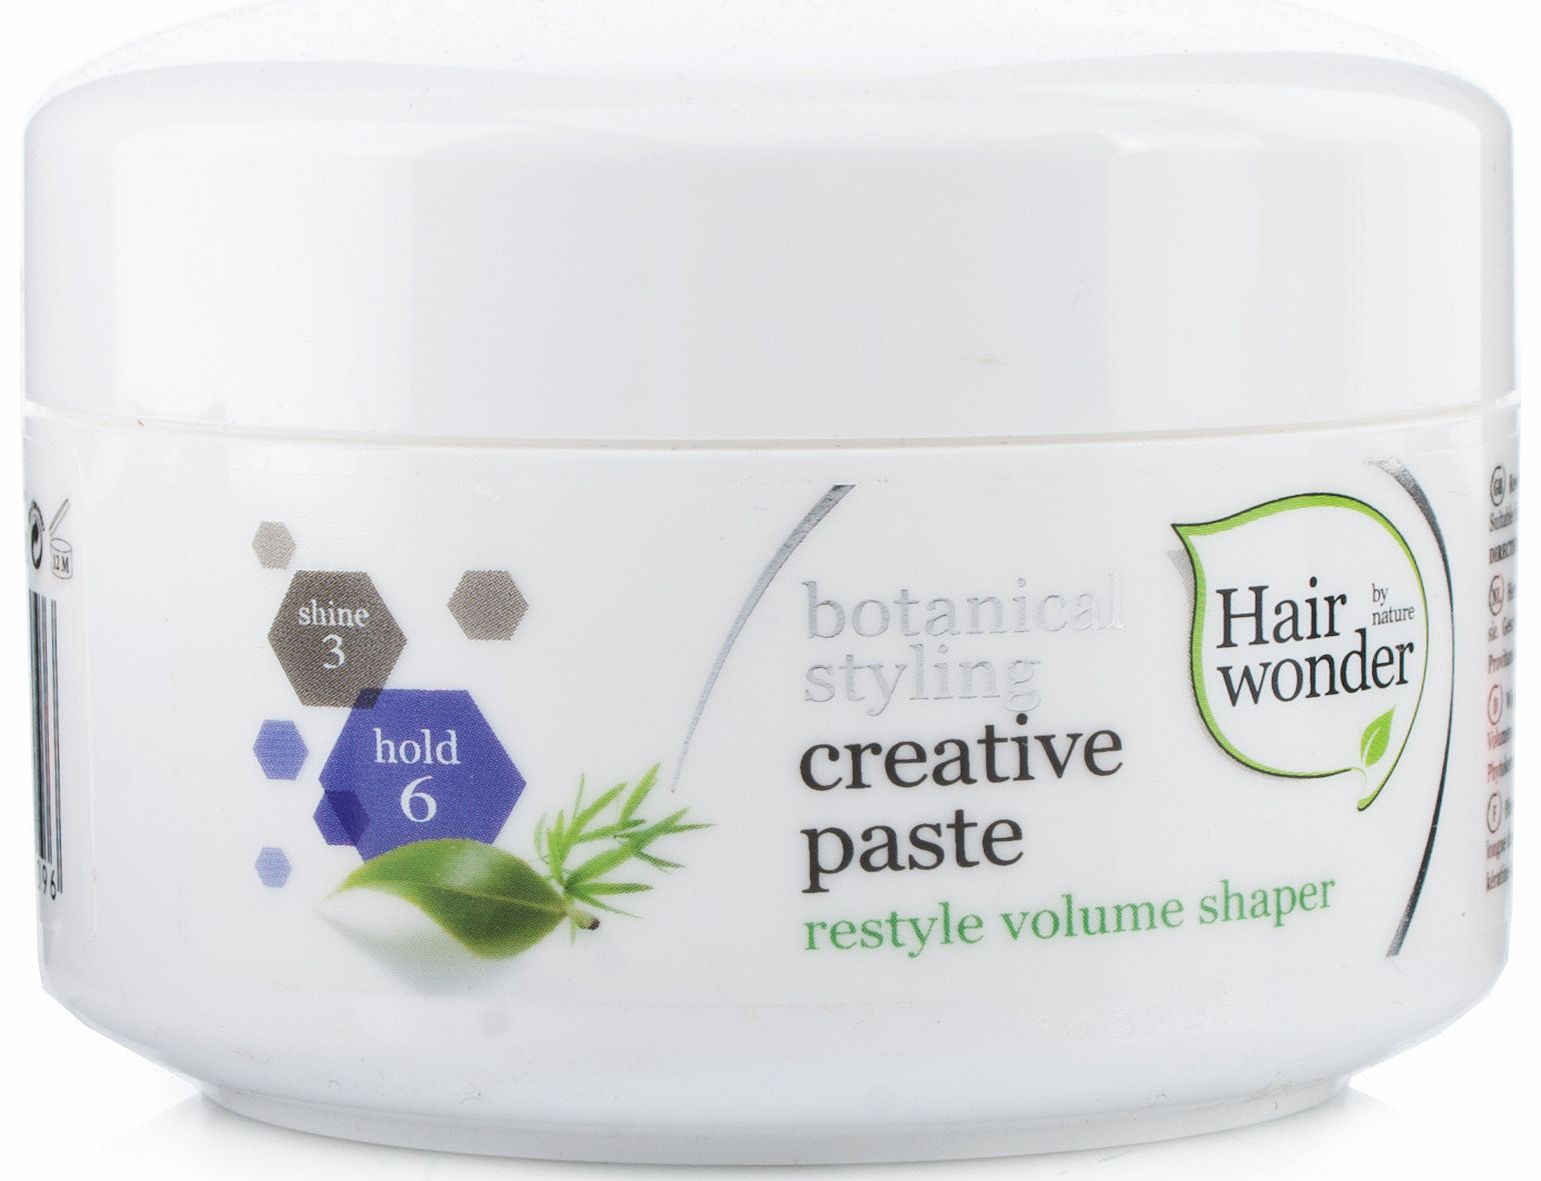 Hair Wonder Botanical Styling Creative Paste: Restyle volume shaper for long lasting definition, volume and dimension. This paste is non-sticky and is high in moisture. Enriched with 8 certified organic ingredients, Phytokeratin and Provitamin B5. Su